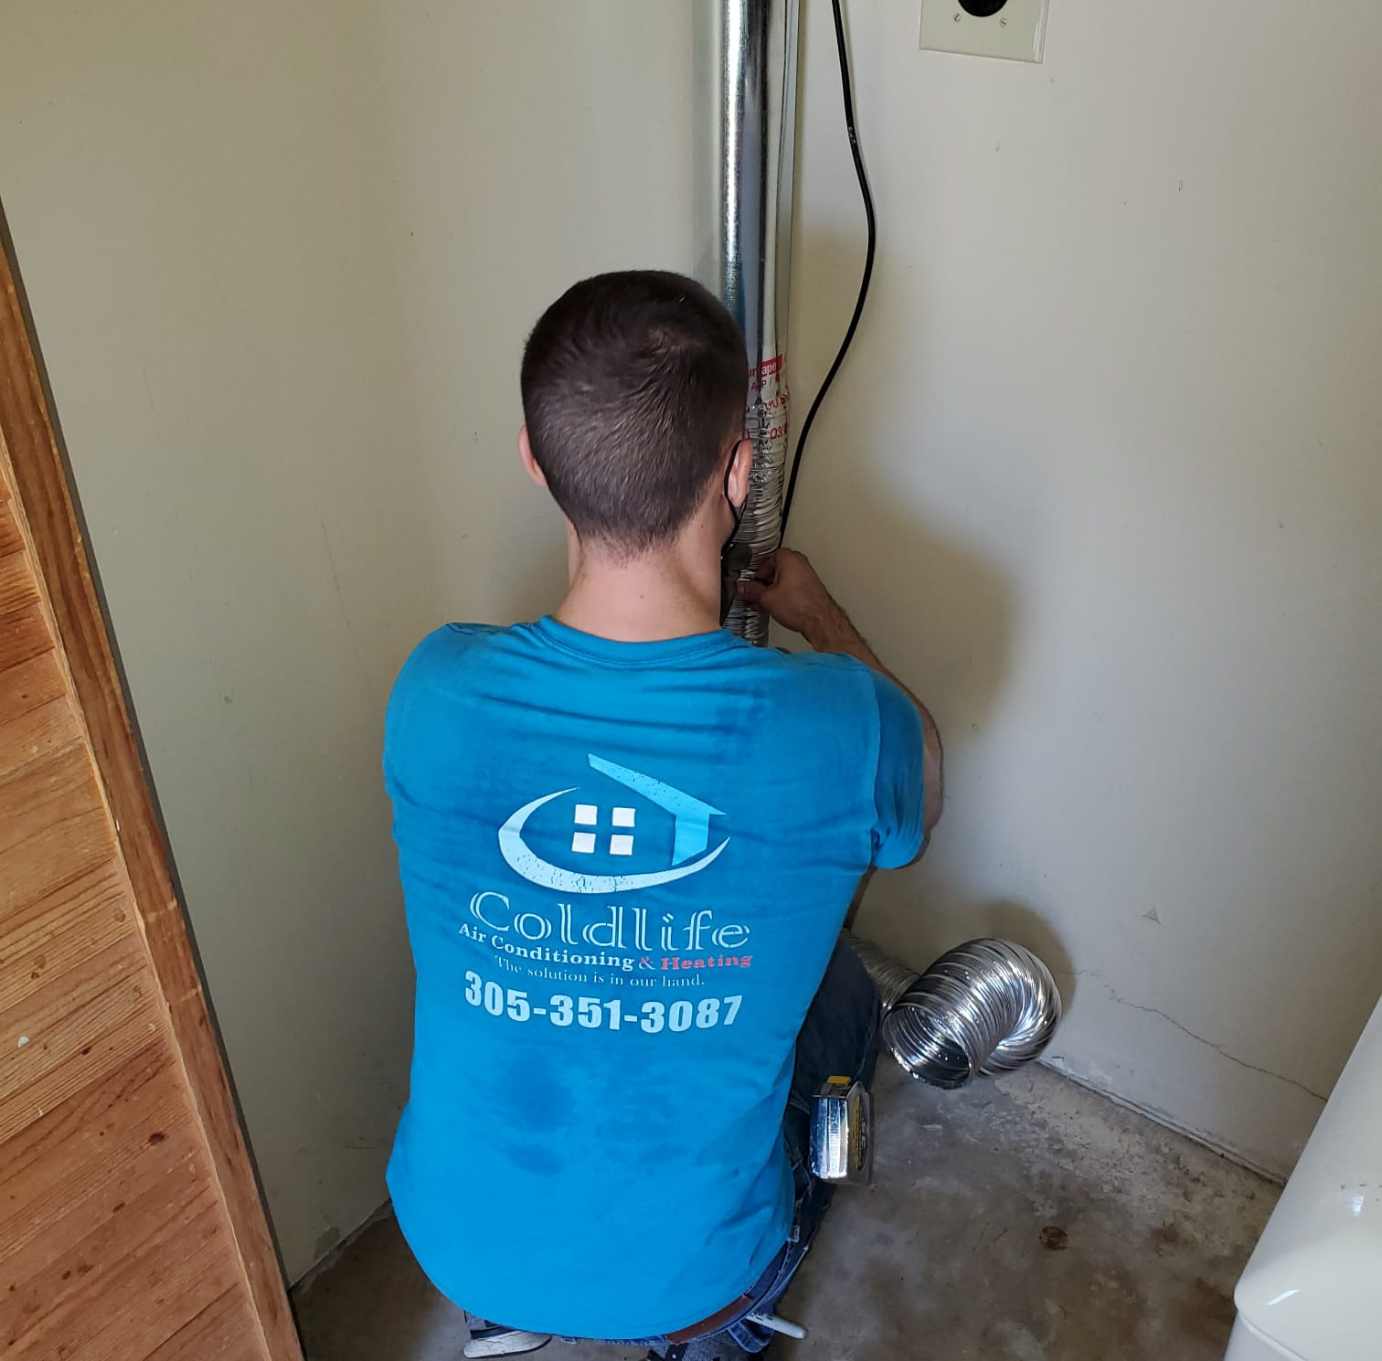 AC Duct Cleaning Services Near Me in Broward County and Miami Dade